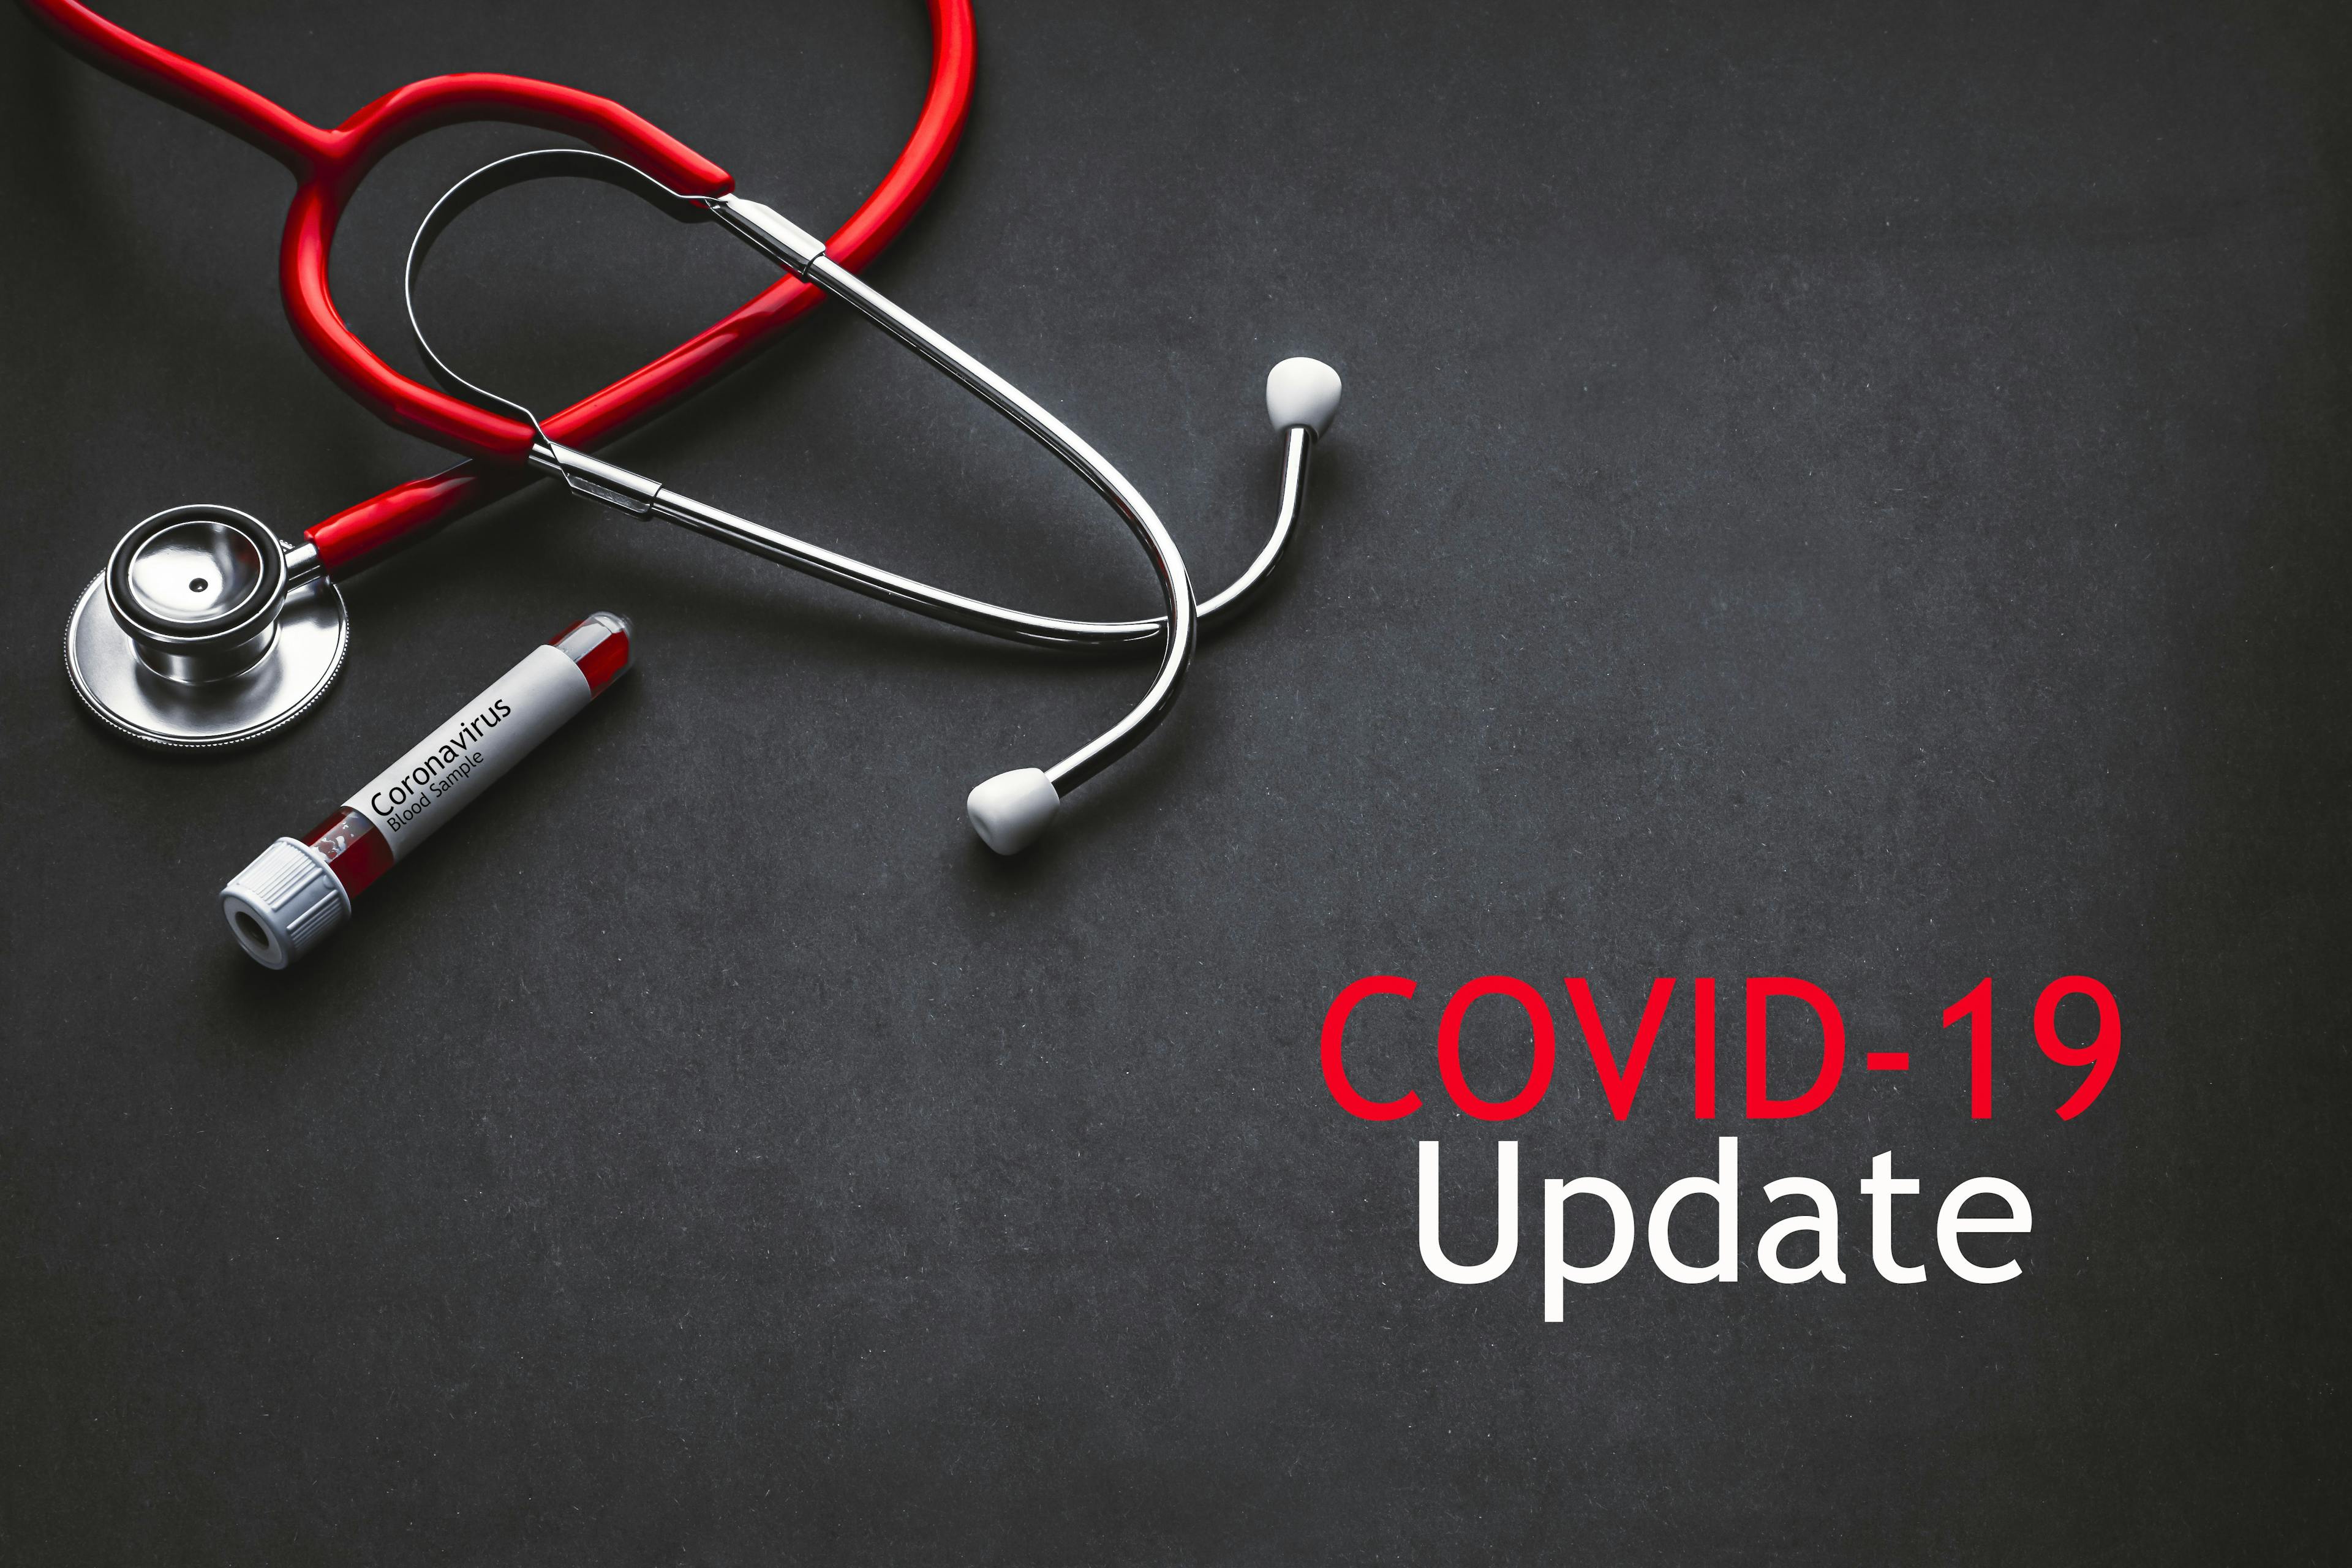 COVID-19 Update: US and Global Cases, Deaths, and Recoveries as of October 9, 2020